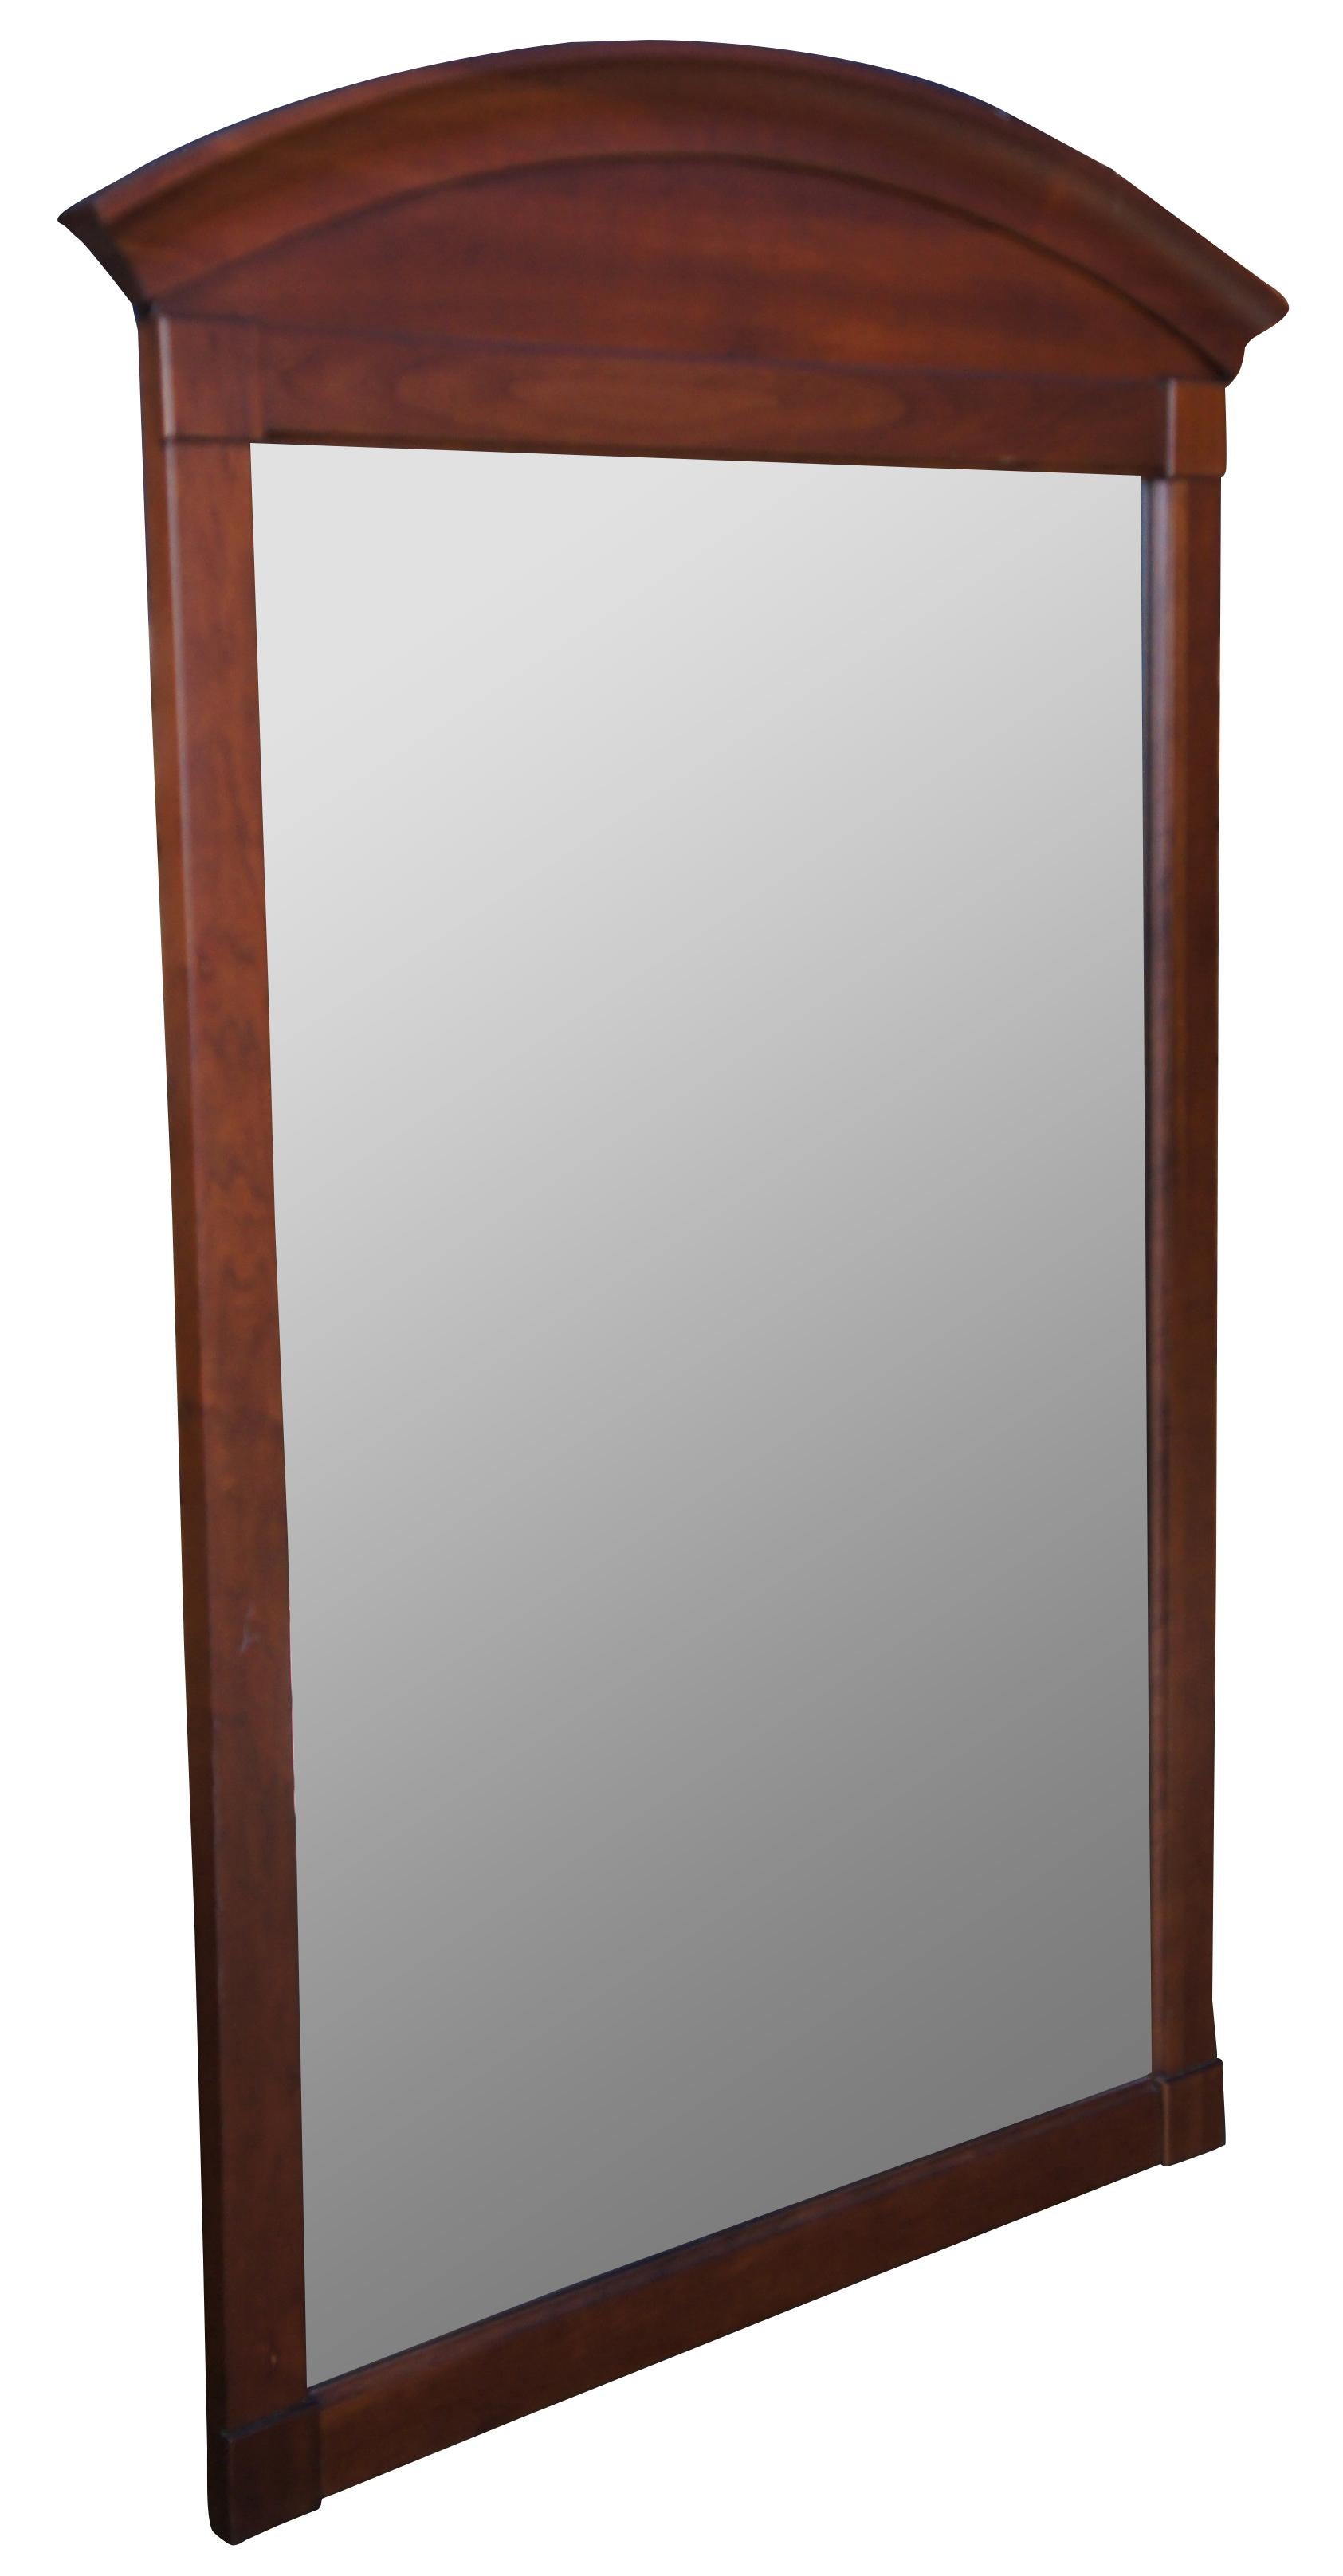 Vintage Ethan Allen American Impressions mirror. Made of cherry featuring traditional styling with an arched or domed top and beveled mirror. #24-5410, made in March of 1993.
 